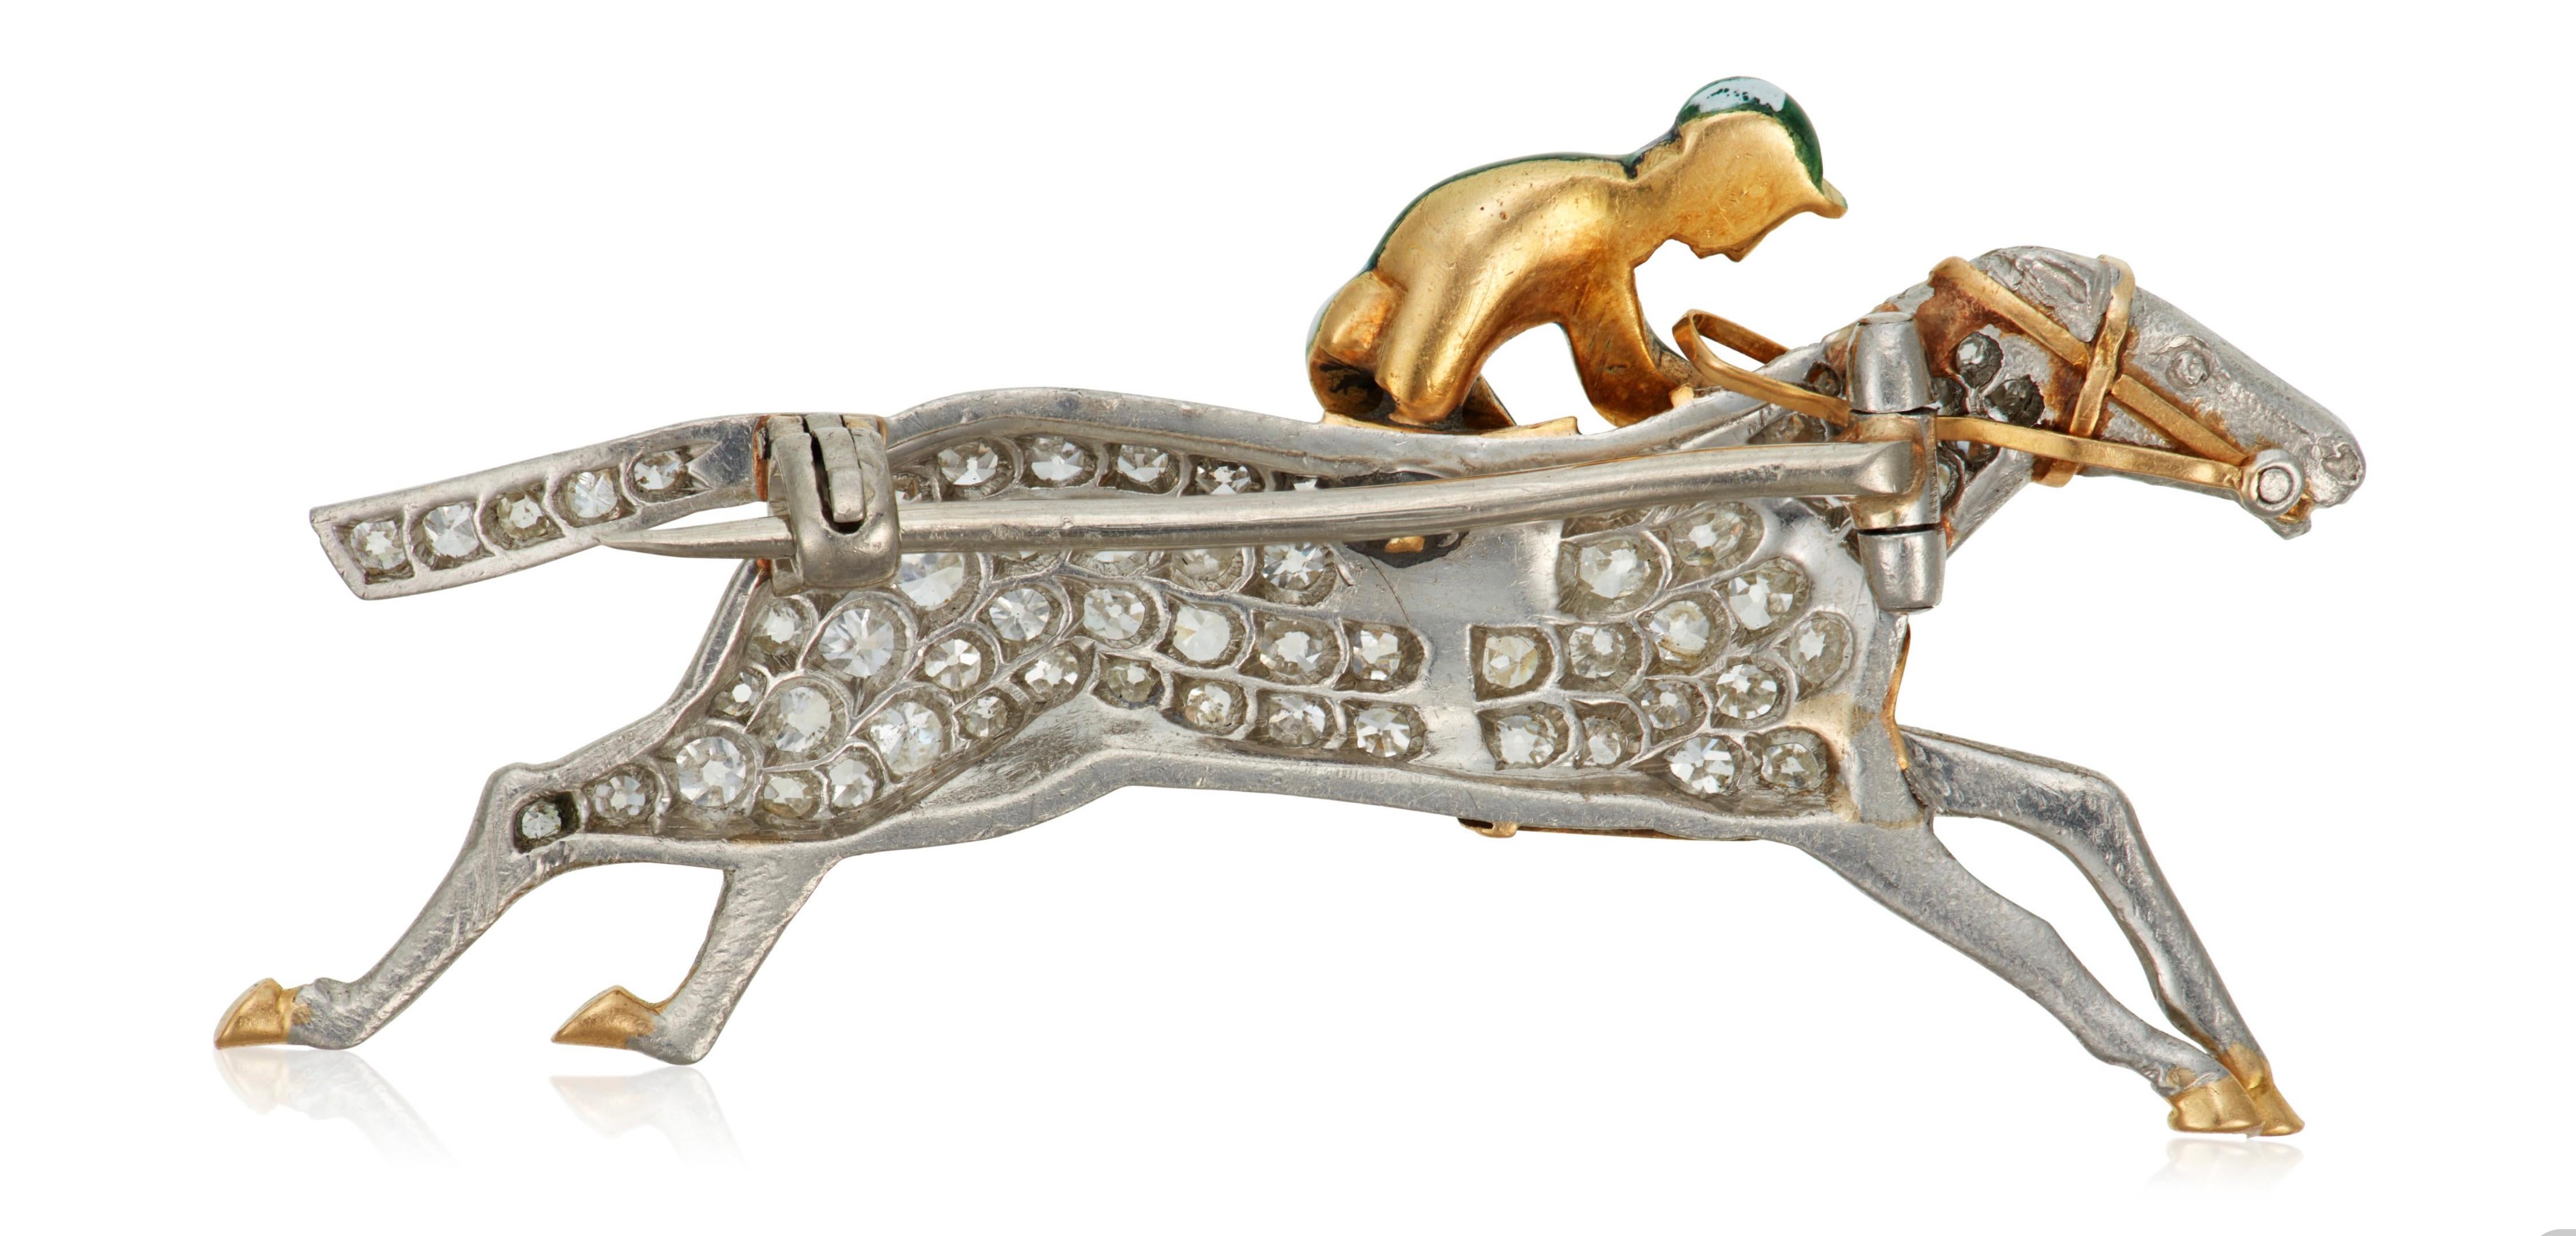 Art Deco and Enamel Jockey brooch 
Designed as a jockey racing a horse, old, single and rose-cut diamonds, variously-colored enamel, platinum and yellow gold, circa 1925
Size/Dimensions: 5.0 cm (2 in)
Gross Weight: 6.9 dwts
